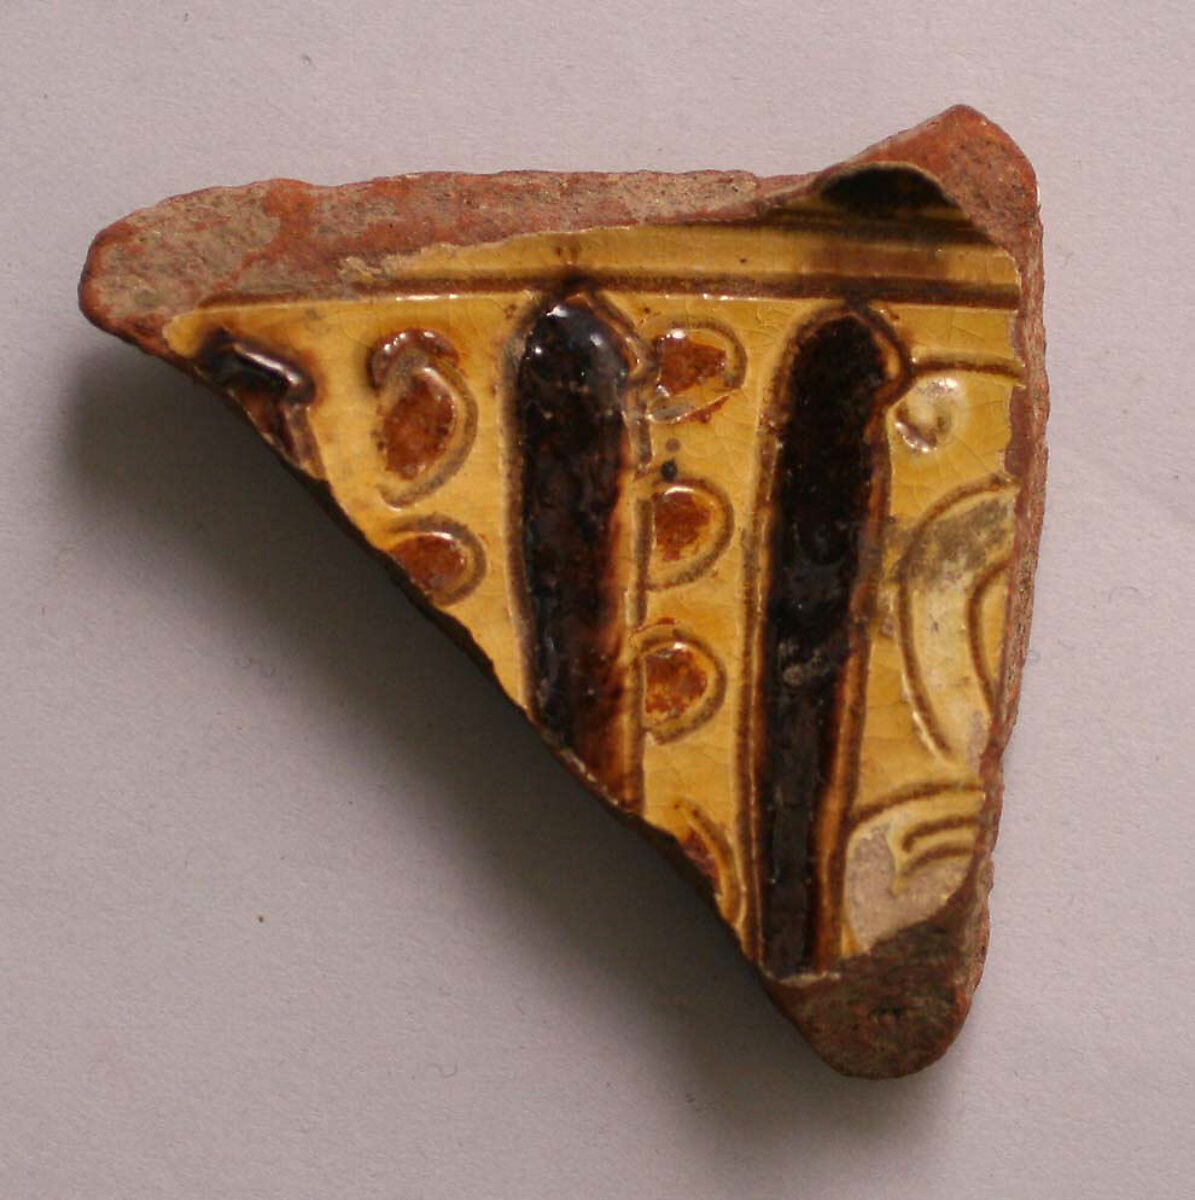 Fragment, Earthenware; incised decoration through a white slip and coloring under transparent glaze. 